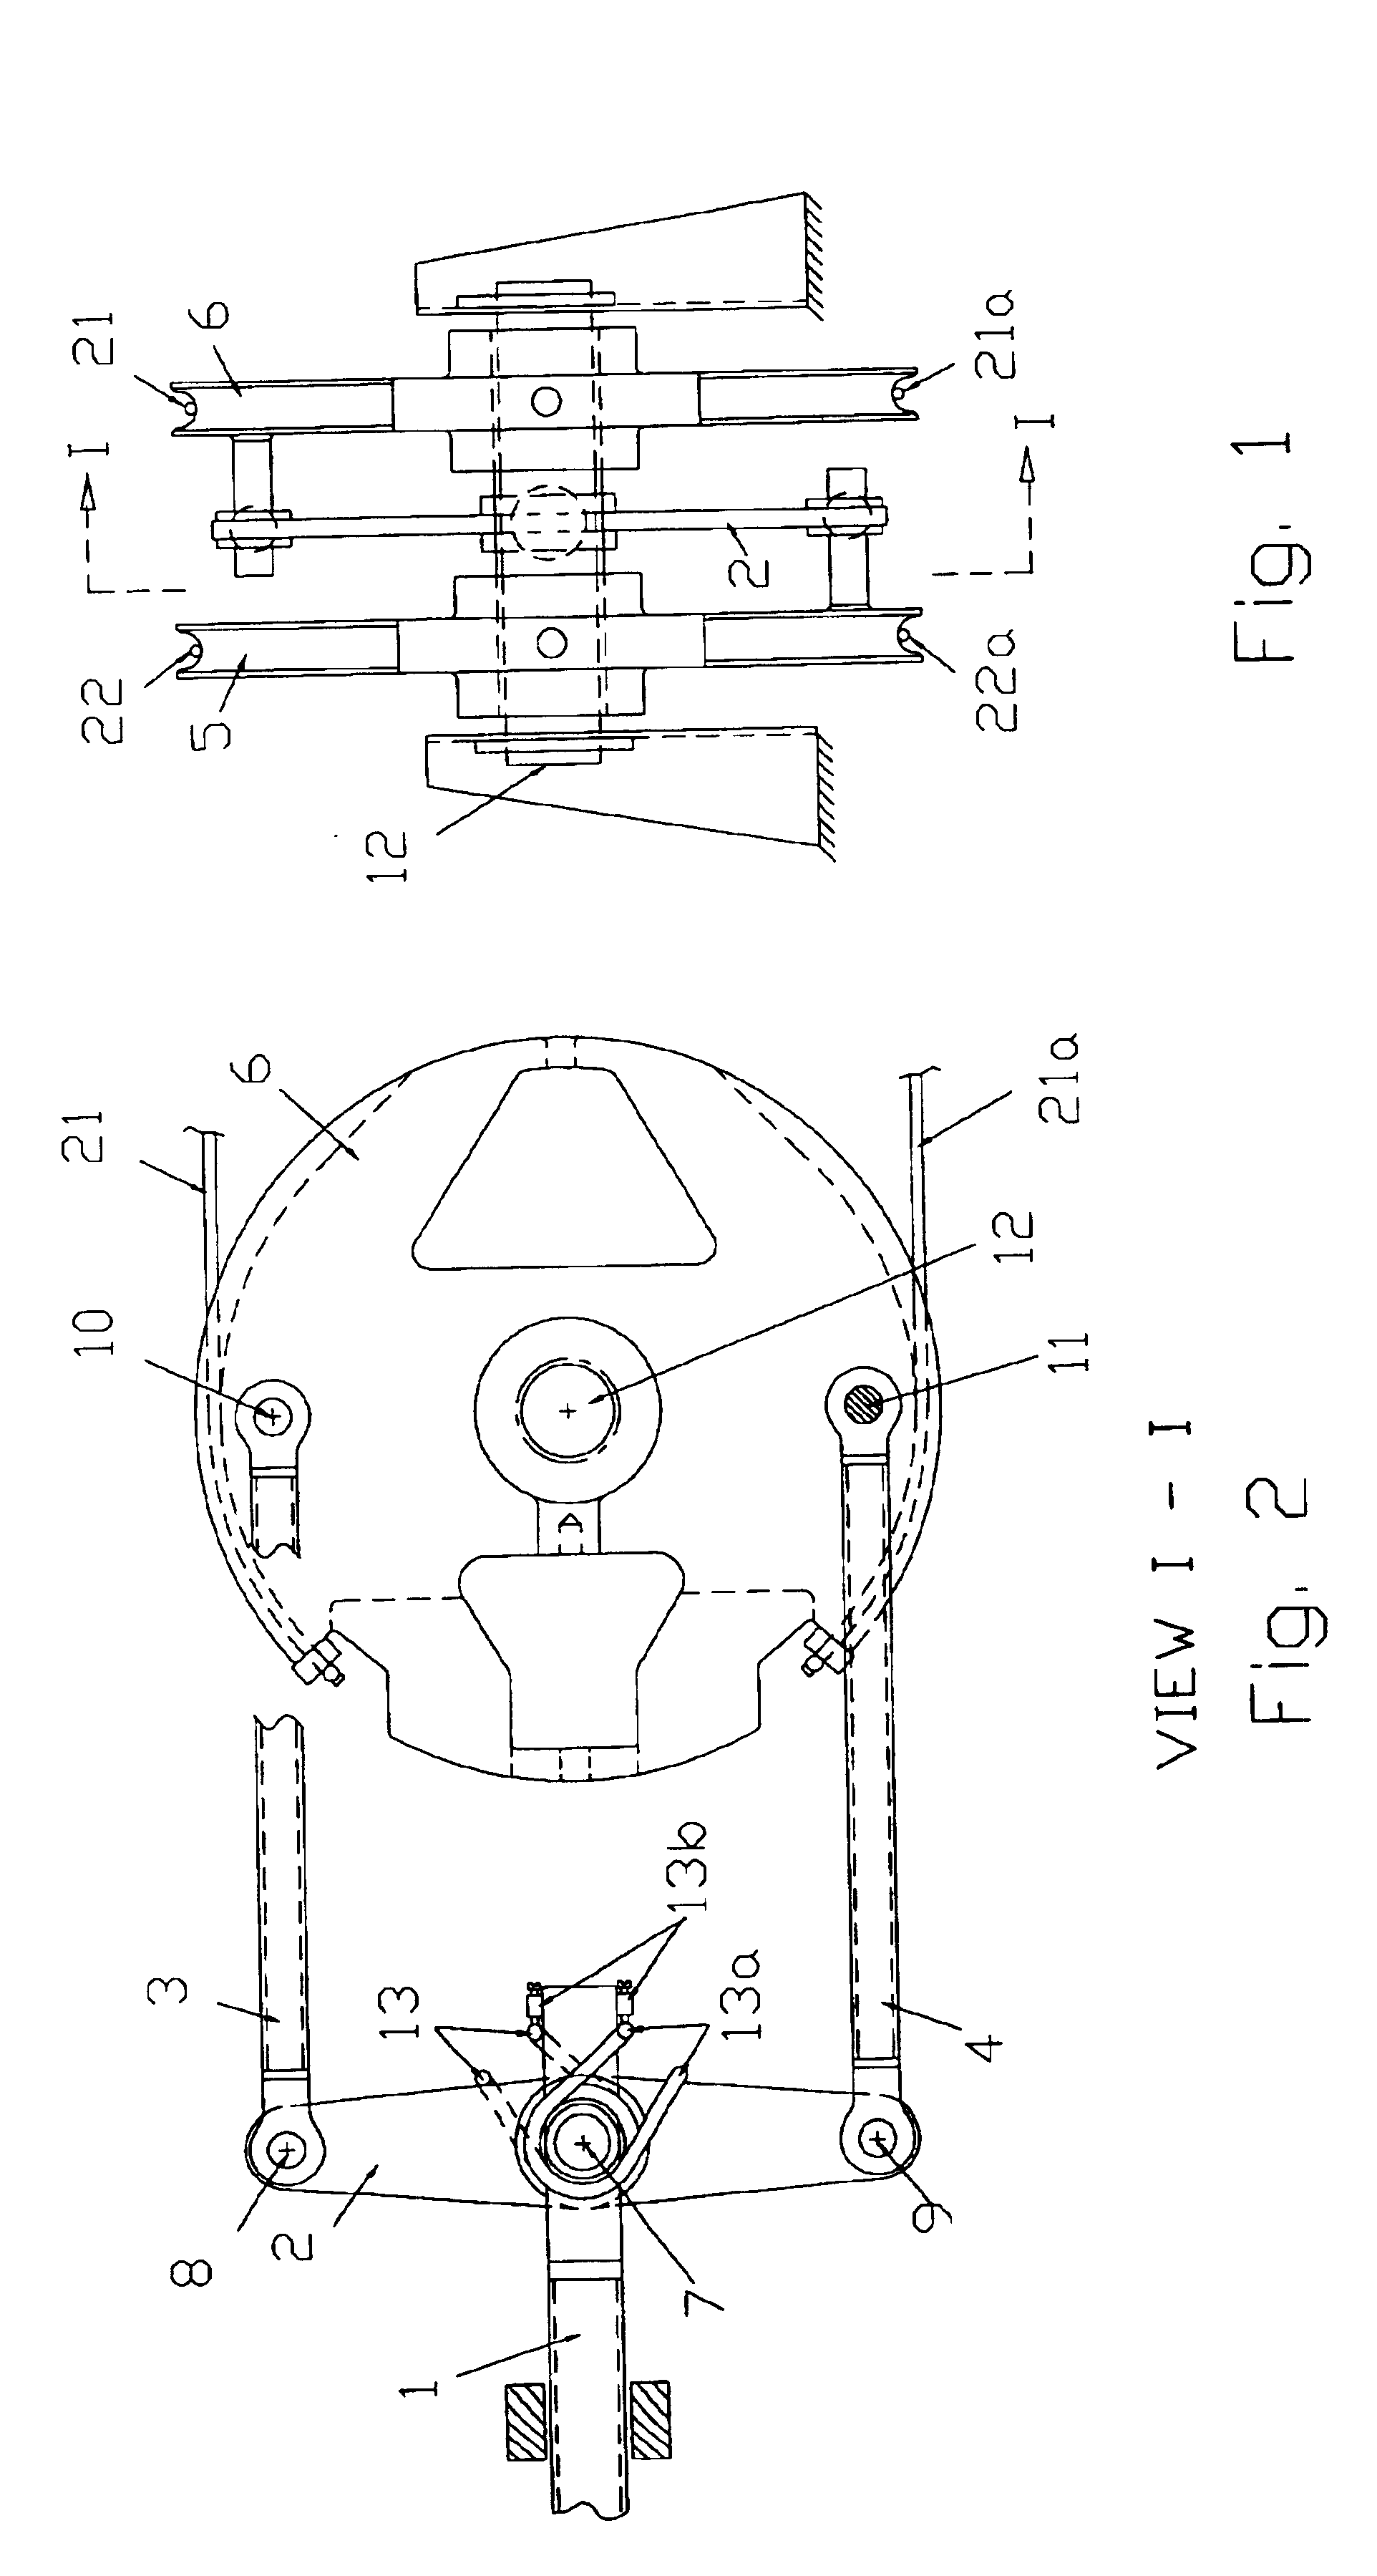 Non-jamming, fail safe flight control system with non-symmetric load alleviation capability